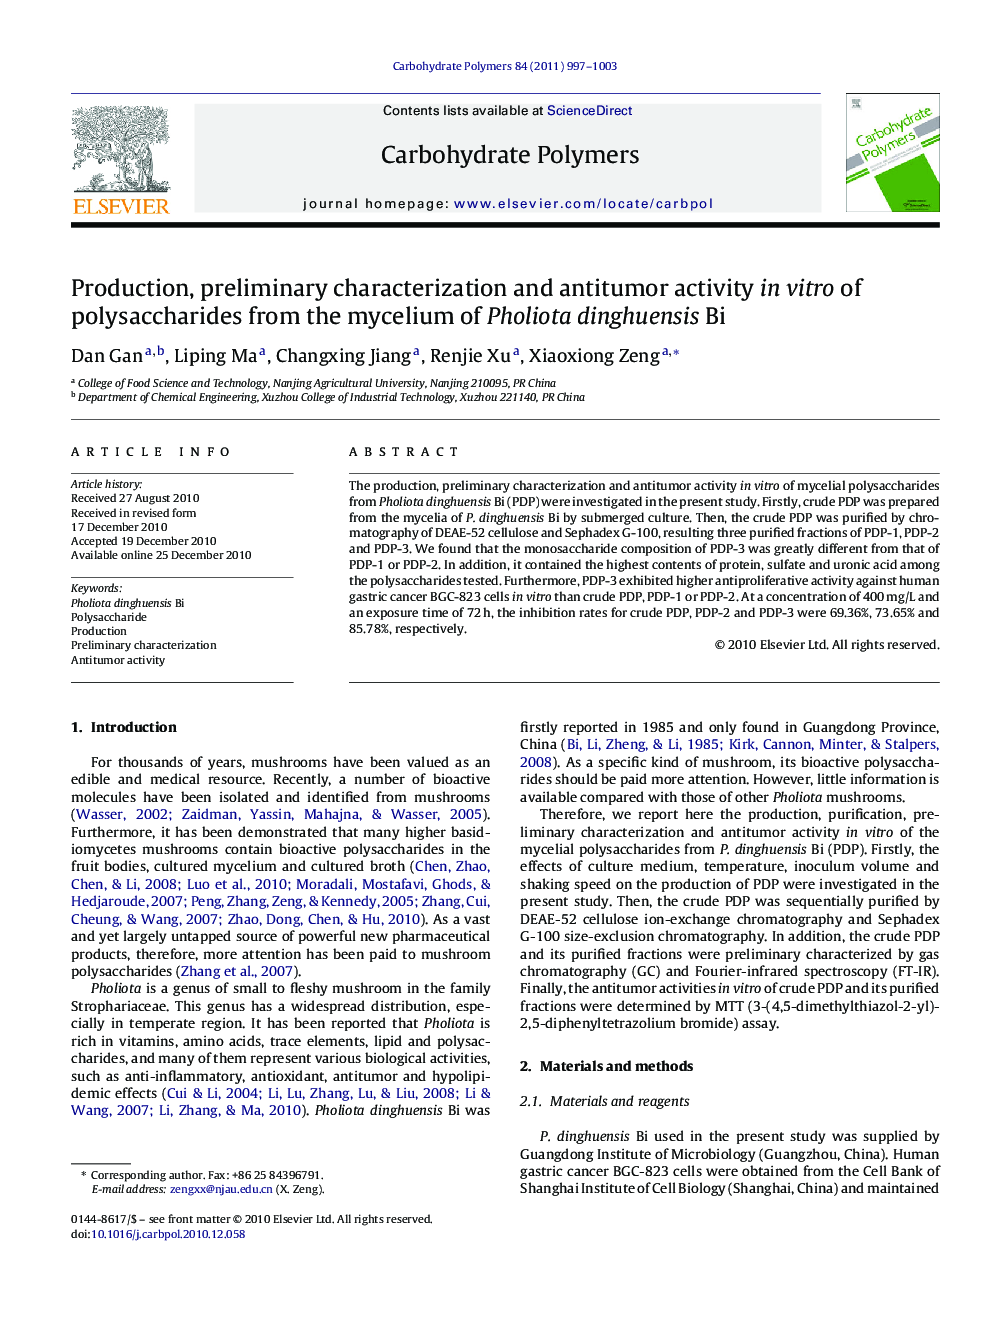 Production, preliminary characterization and antitumor activity in vitro of polysaccharides from the mycelium of Pholiota dinghuensis Bi